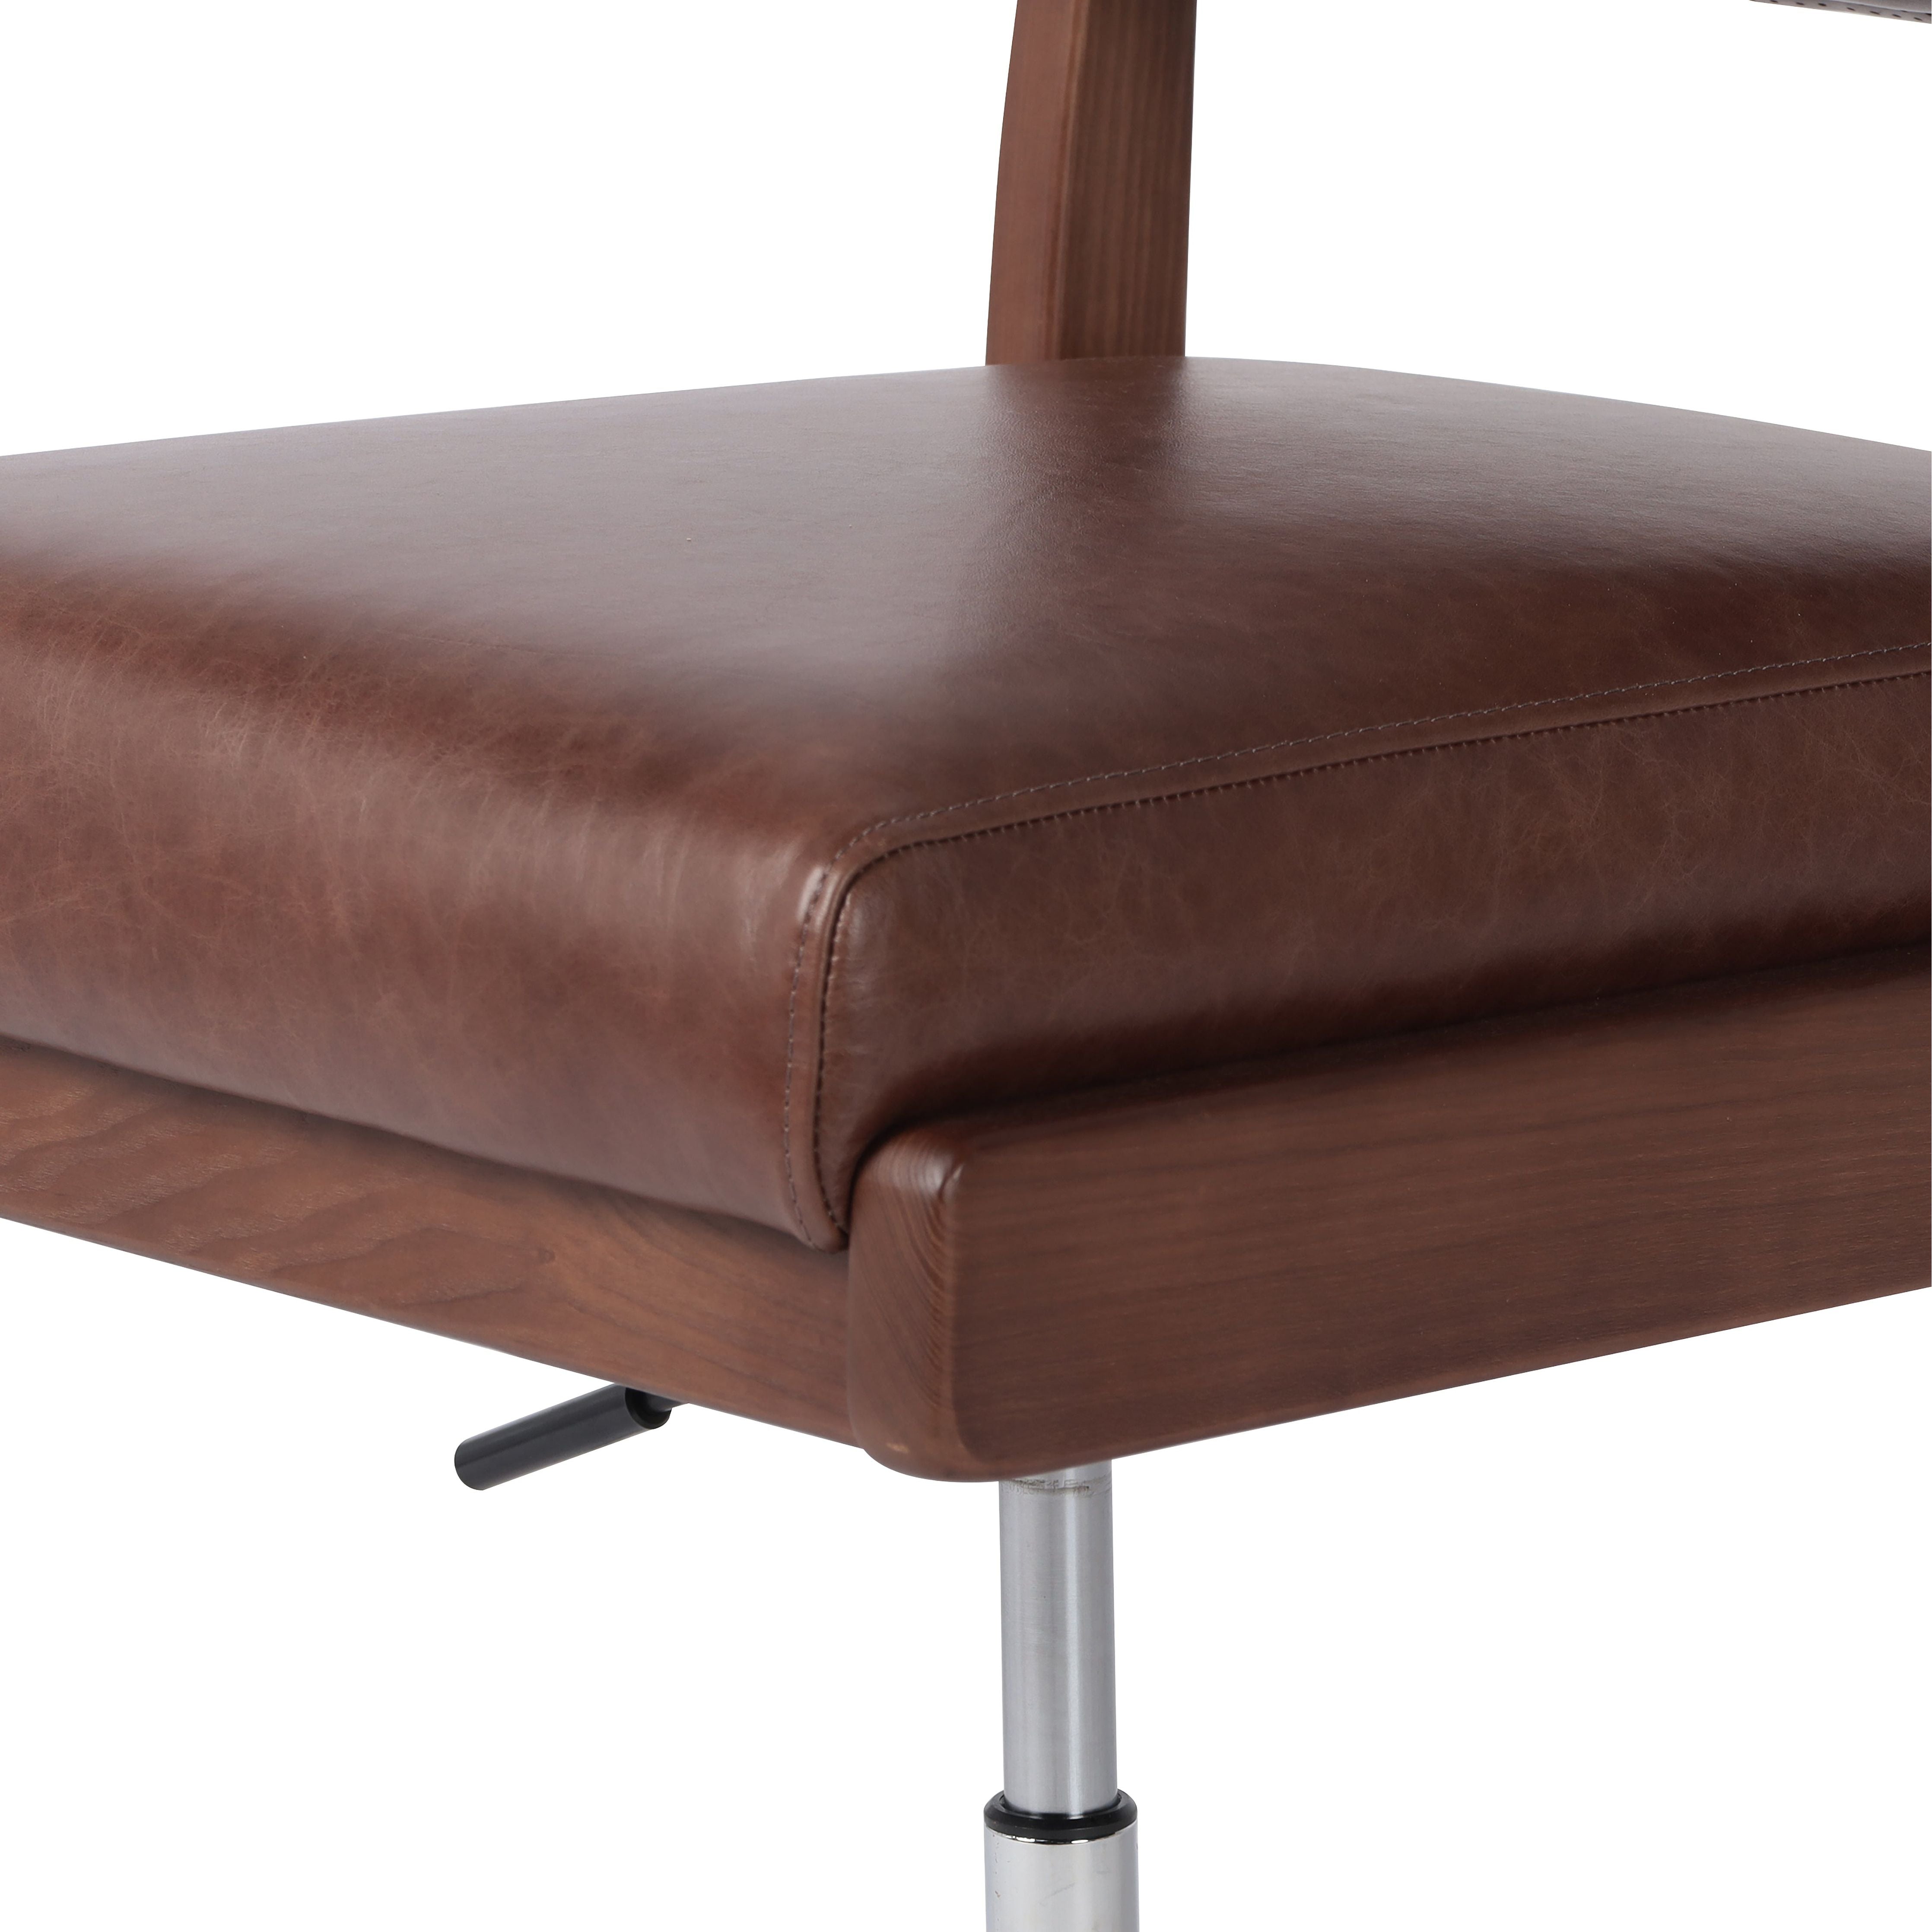 An armless top-grain leather seat and bolster pair with a wooden frame for an understated modern look with a hint of midcentury influence. Amethyst Home provides interior design, new construction, custom furniture, and area rugs in the Austin metro area.